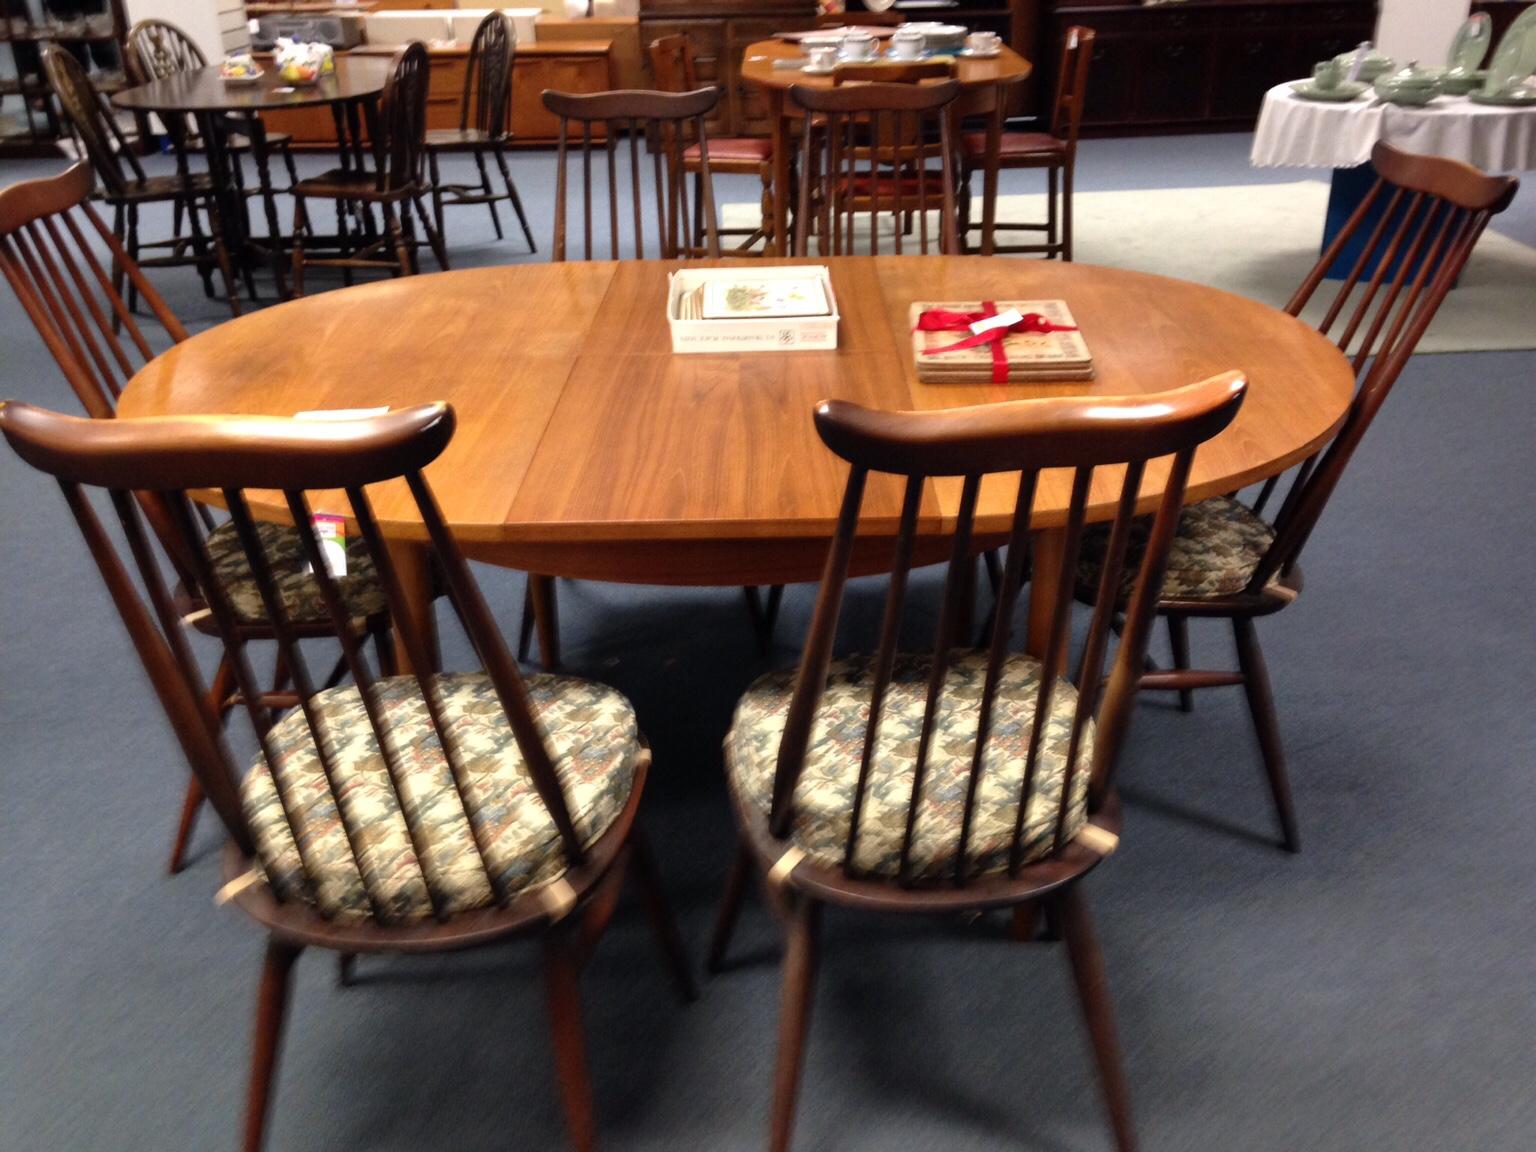 6 Ercol Dining Chairs With Cushions And Table In Co8 Babergh Fur